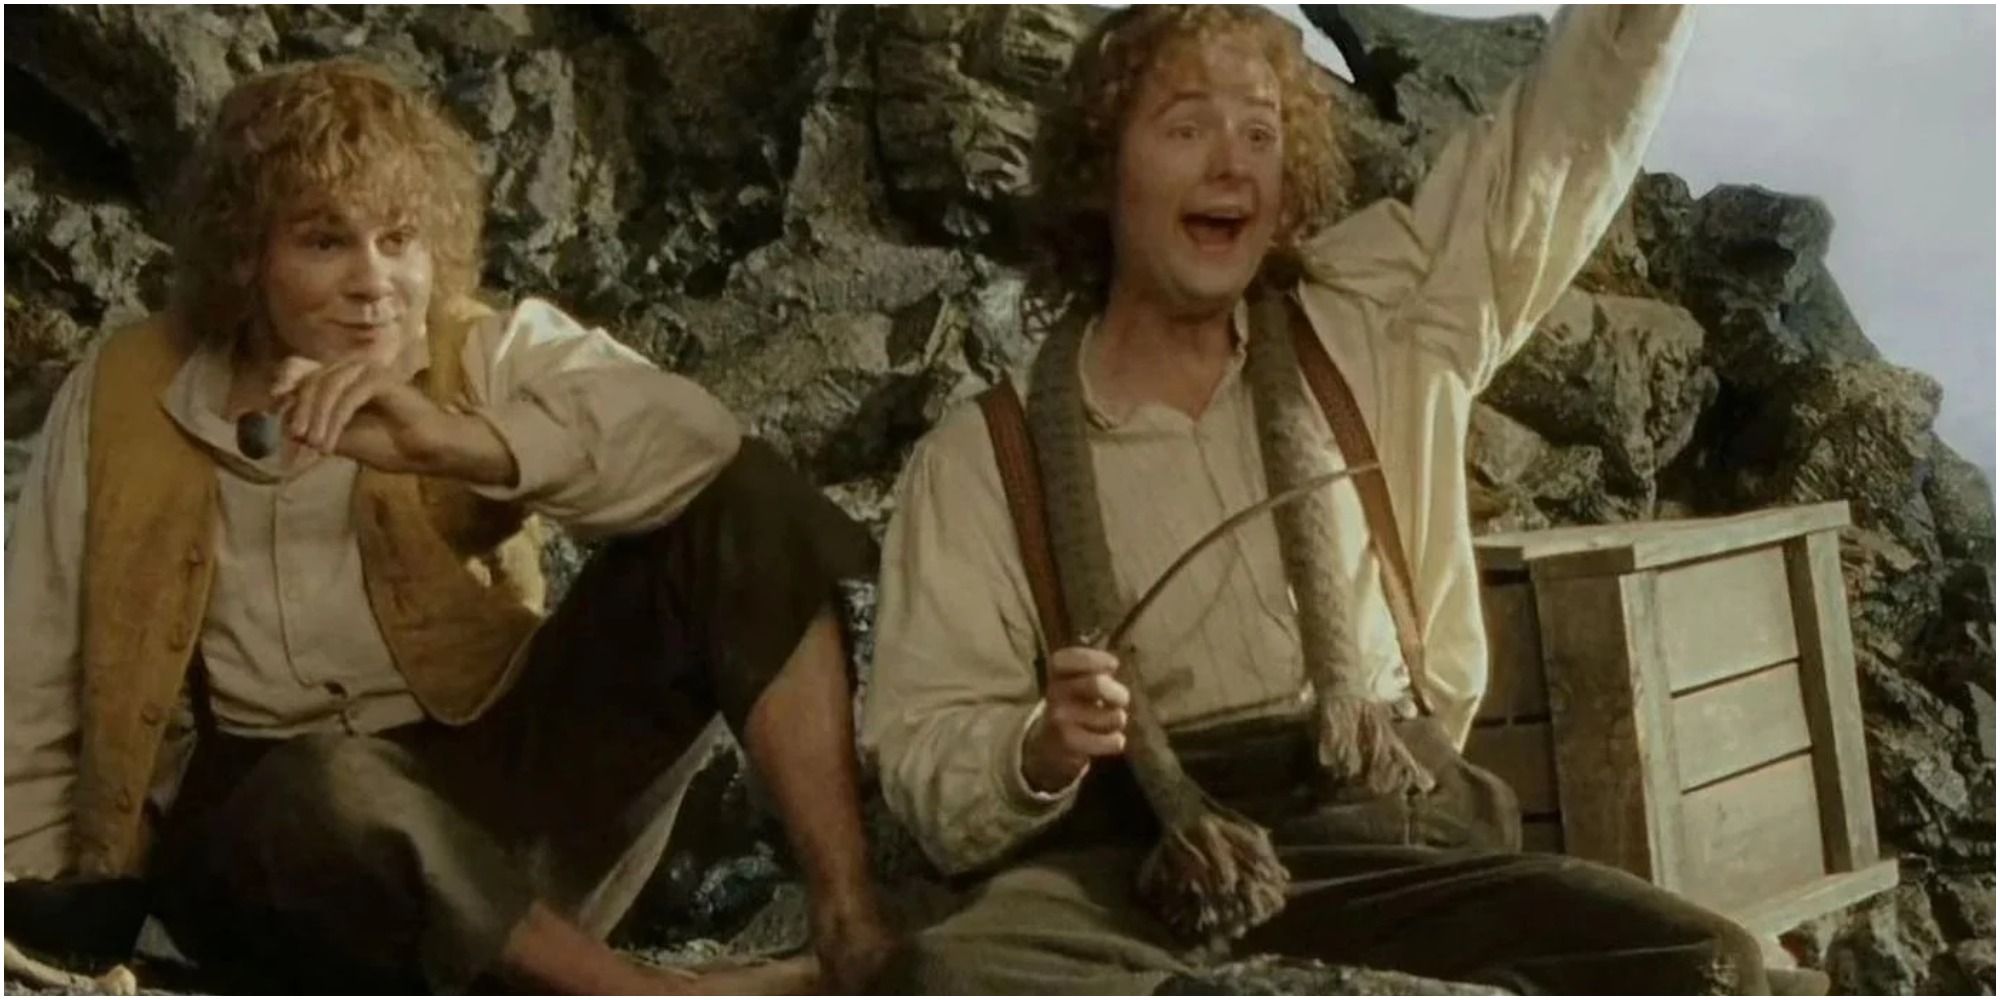 Merry and Pippin celebrating after the fall of Isengard in The Lord of the Rings.